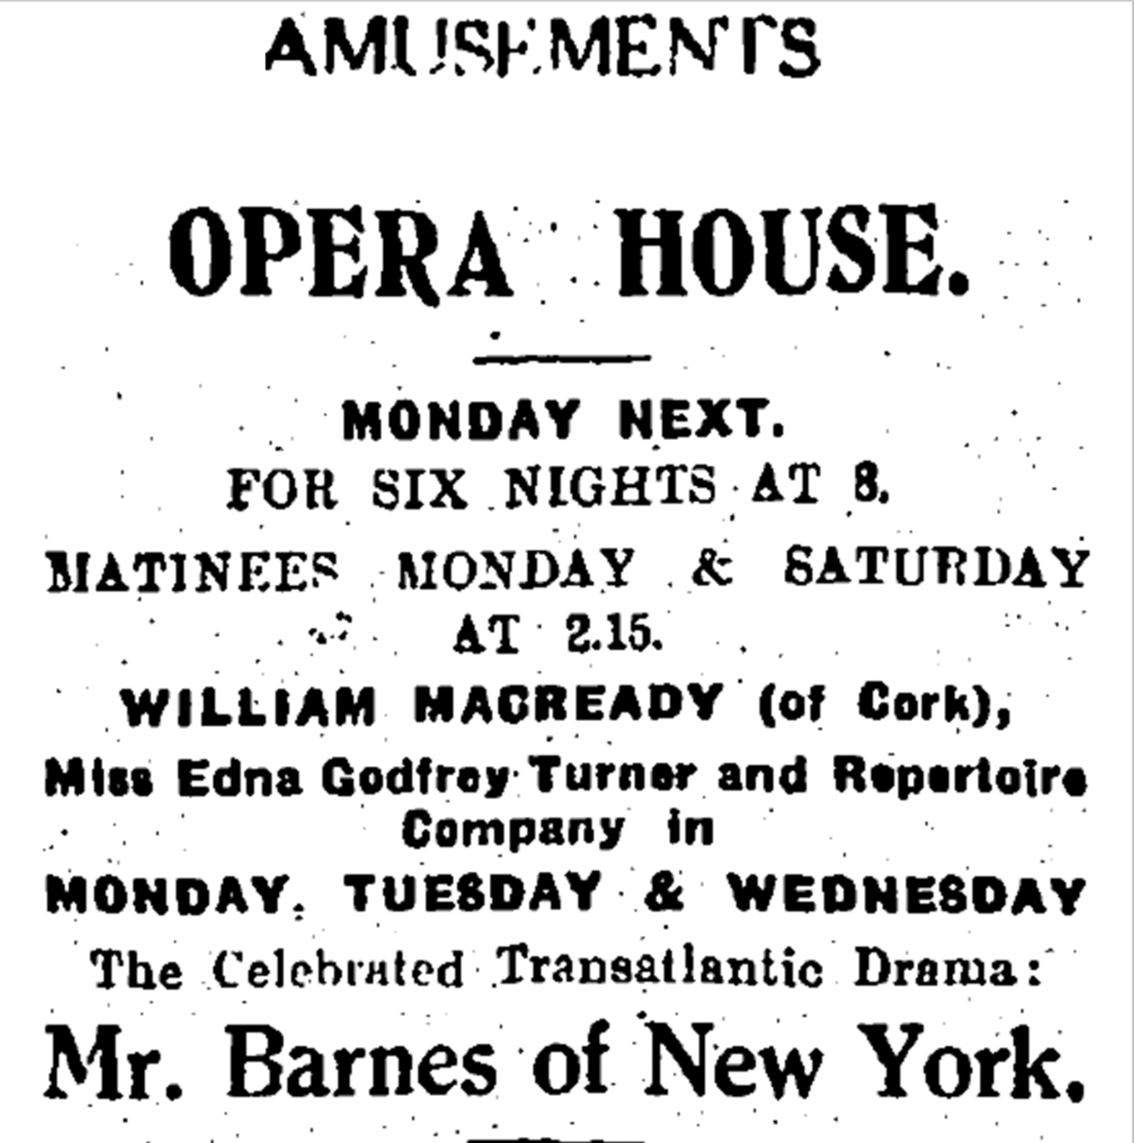 Opera House newspaper clipping from 1922